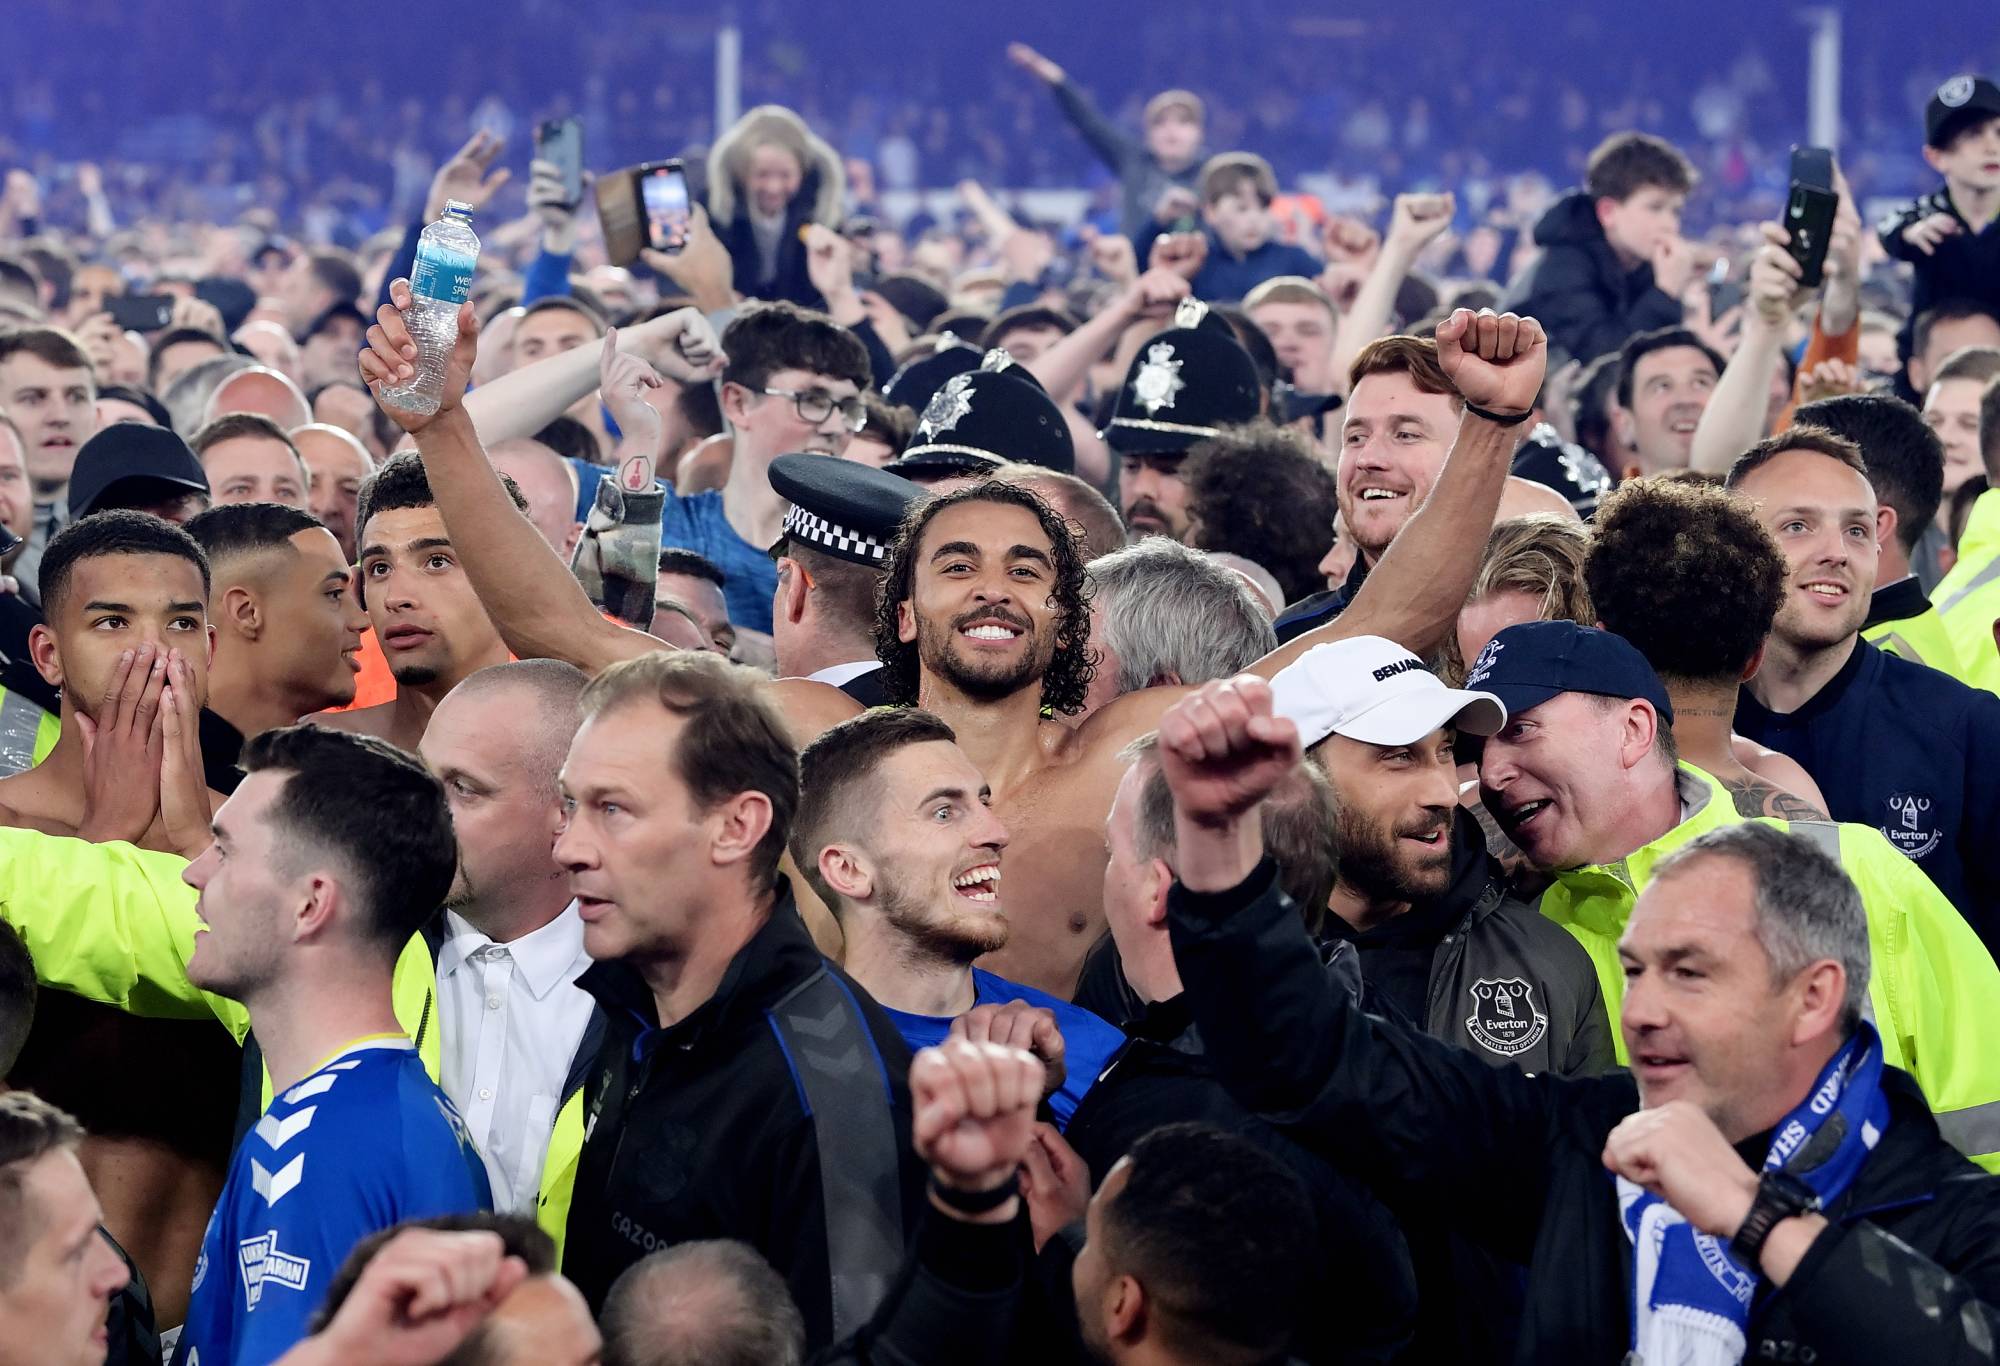 Dominic Calvert-Lewin after the Premier League match between Everton and Crystal Palace at Goodison Park on May 19, 2022 in Liverpool, United Kingdom. (Photo by Tony McArdle/Everton FC via Getty Images)